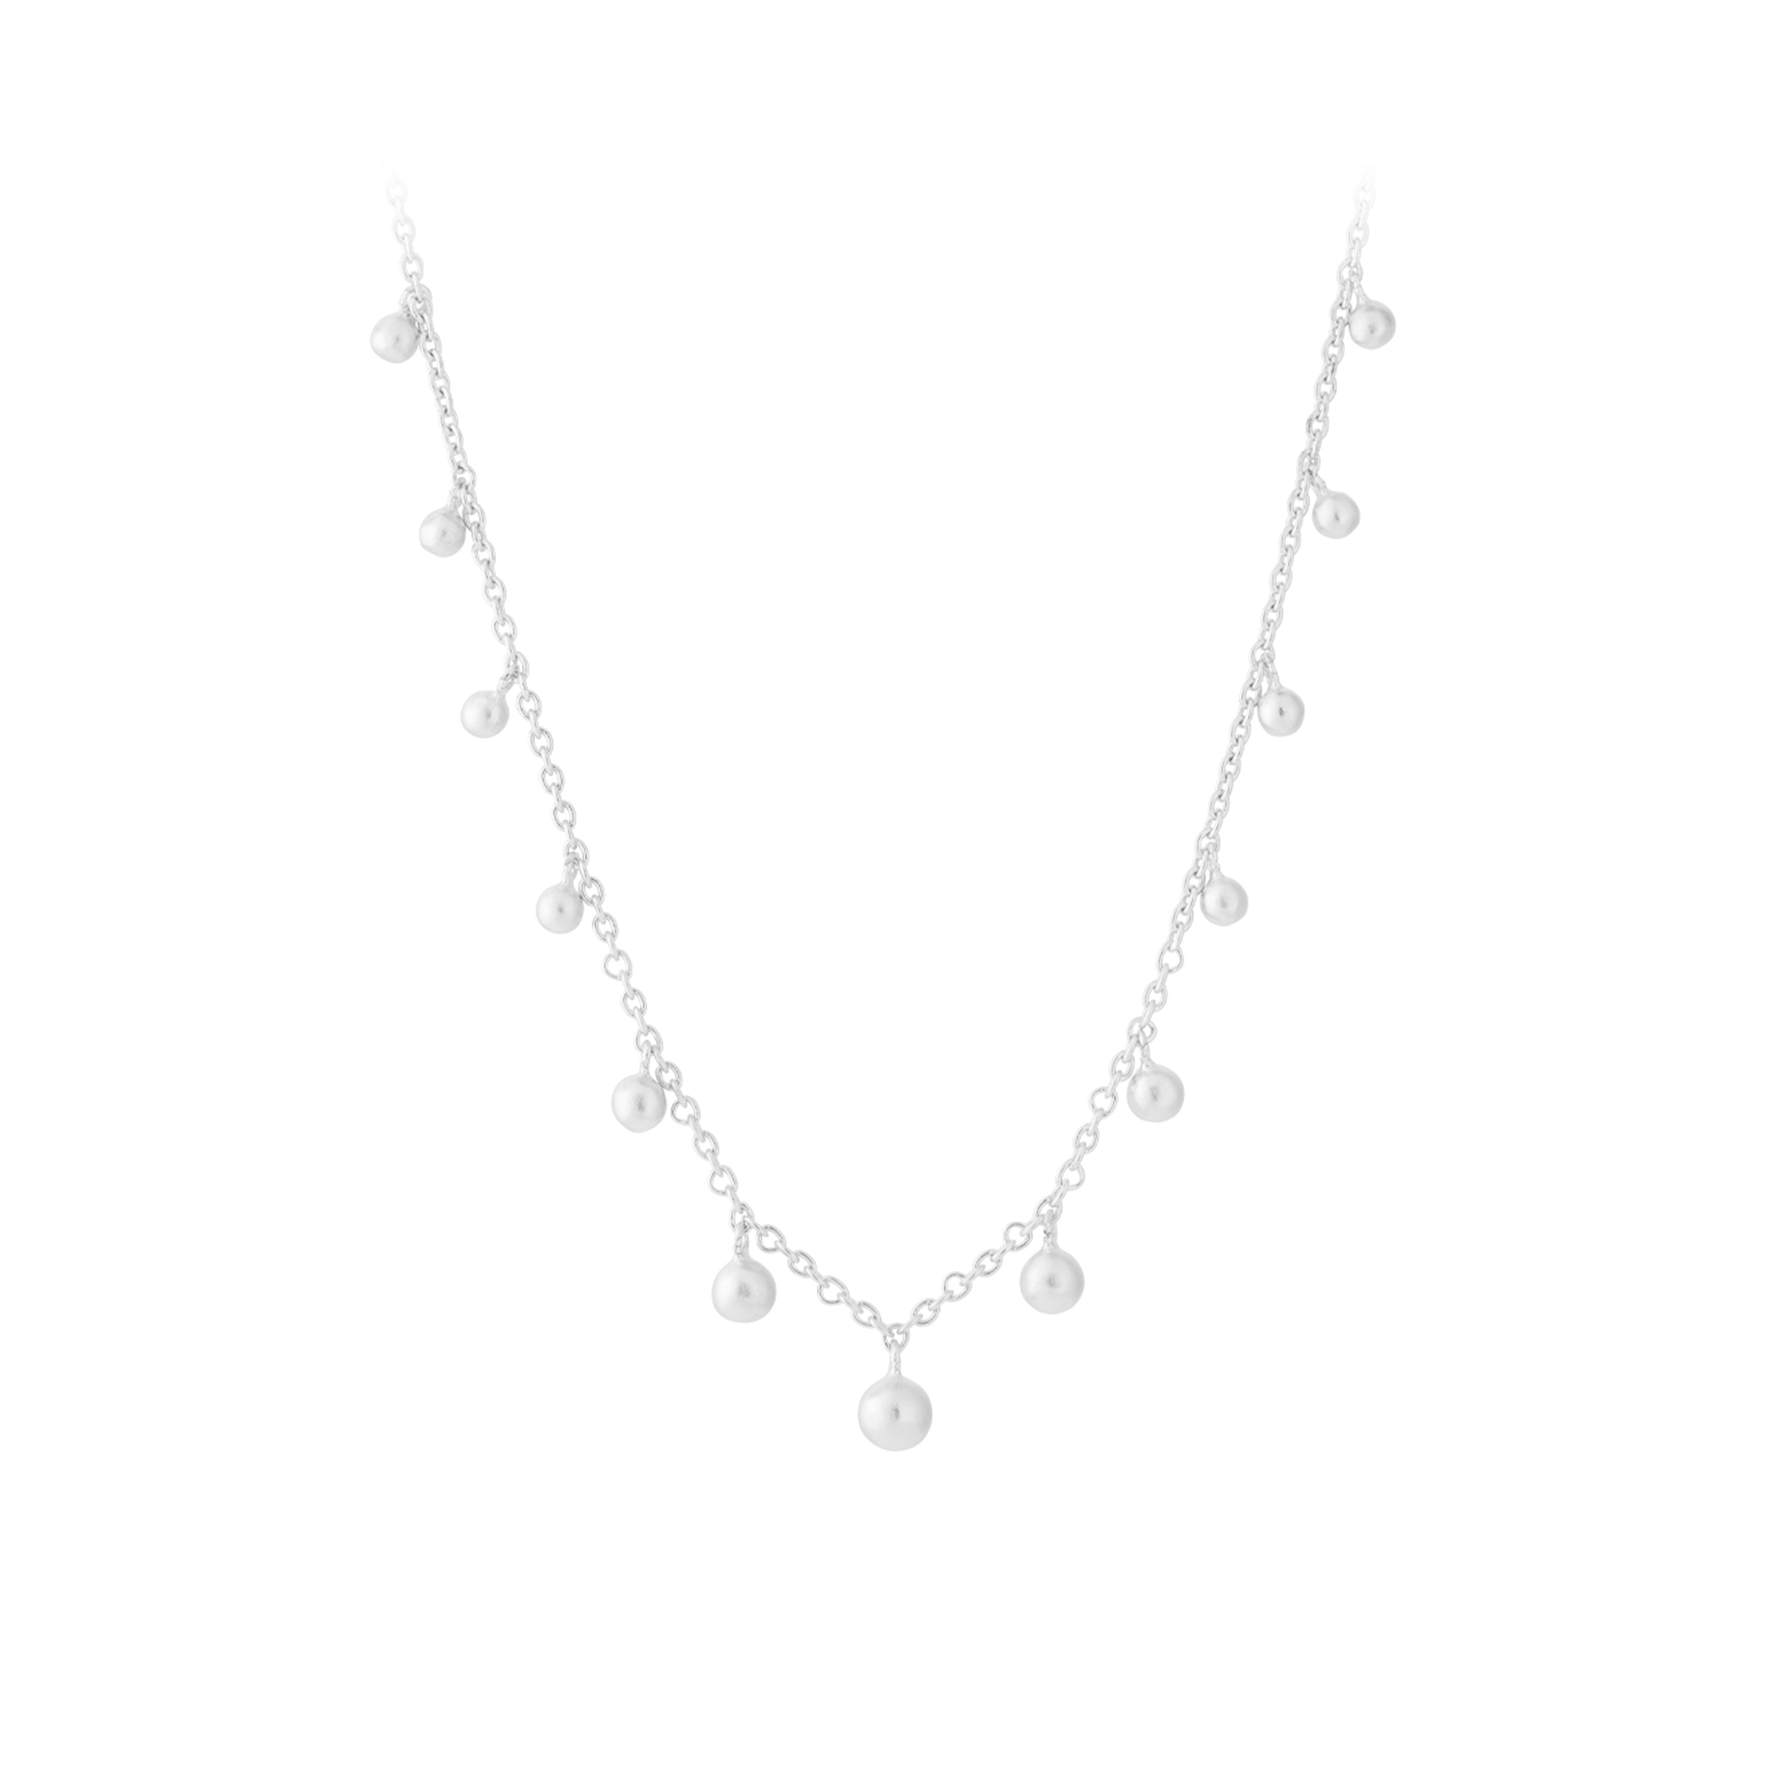 Comet Necklace von Pernille Corydon in Silber Sterling 925